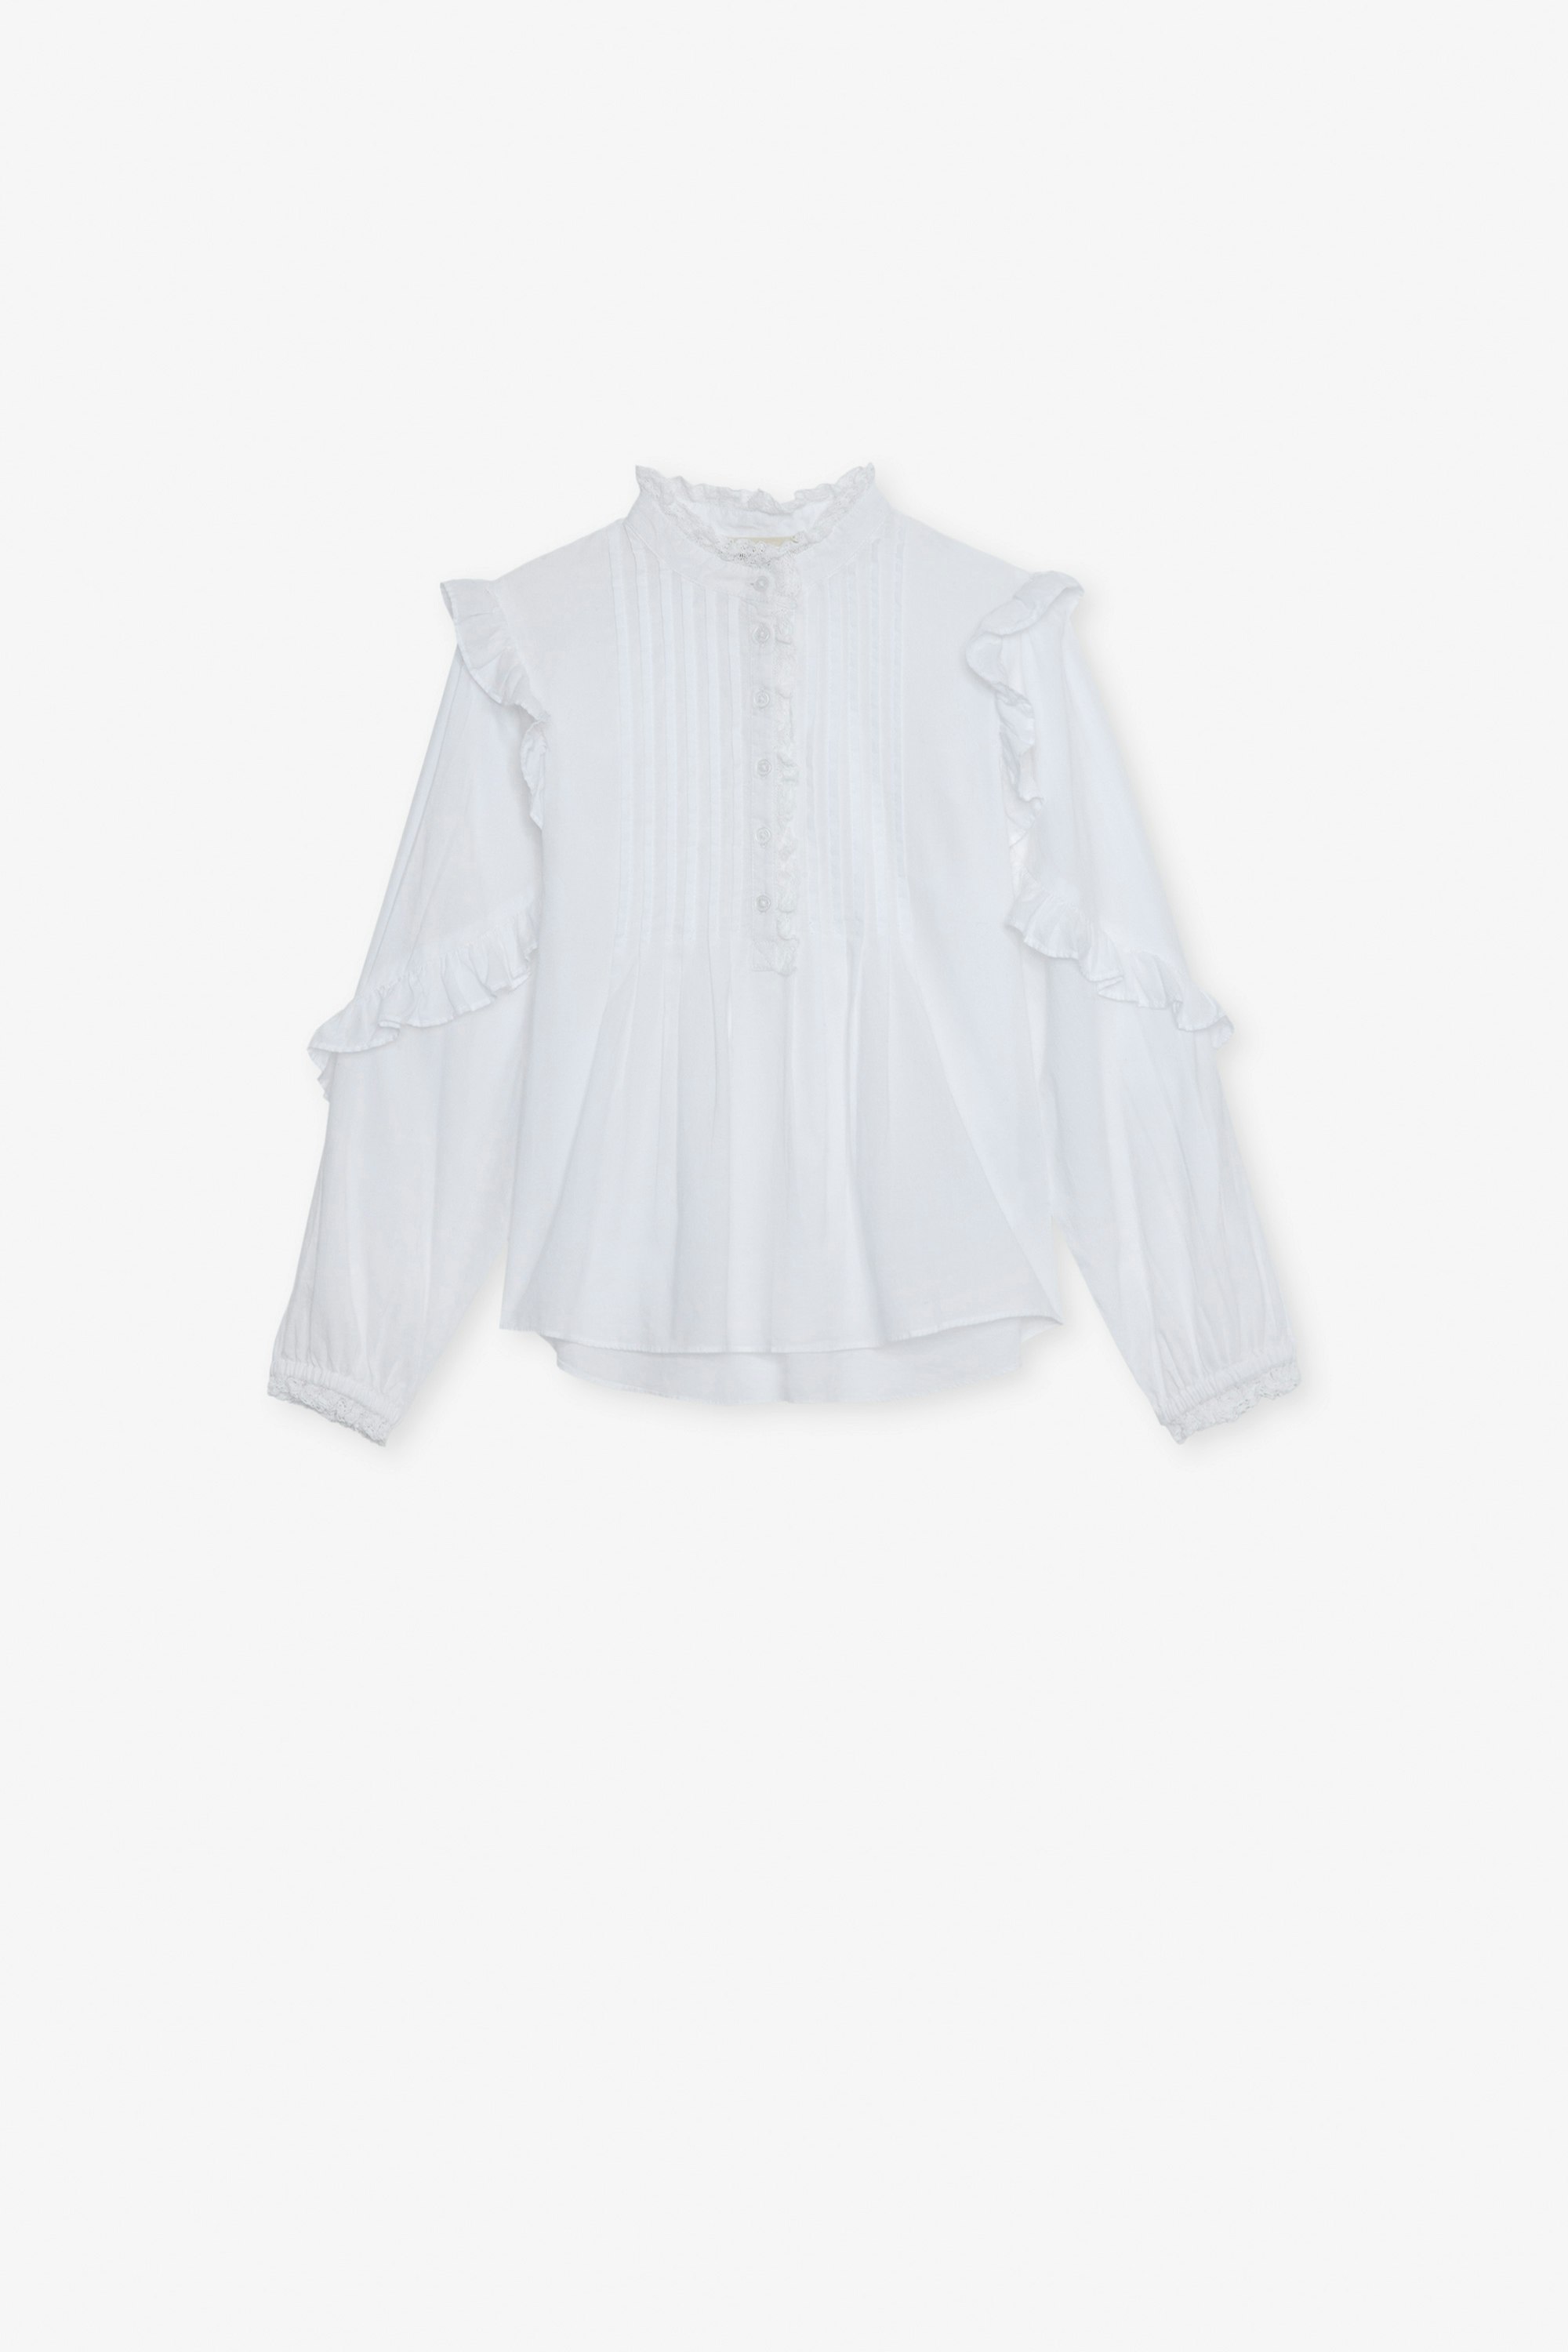 Timmy Girls’ Blouse Girls’ white cotton voile blouse with ruffles.